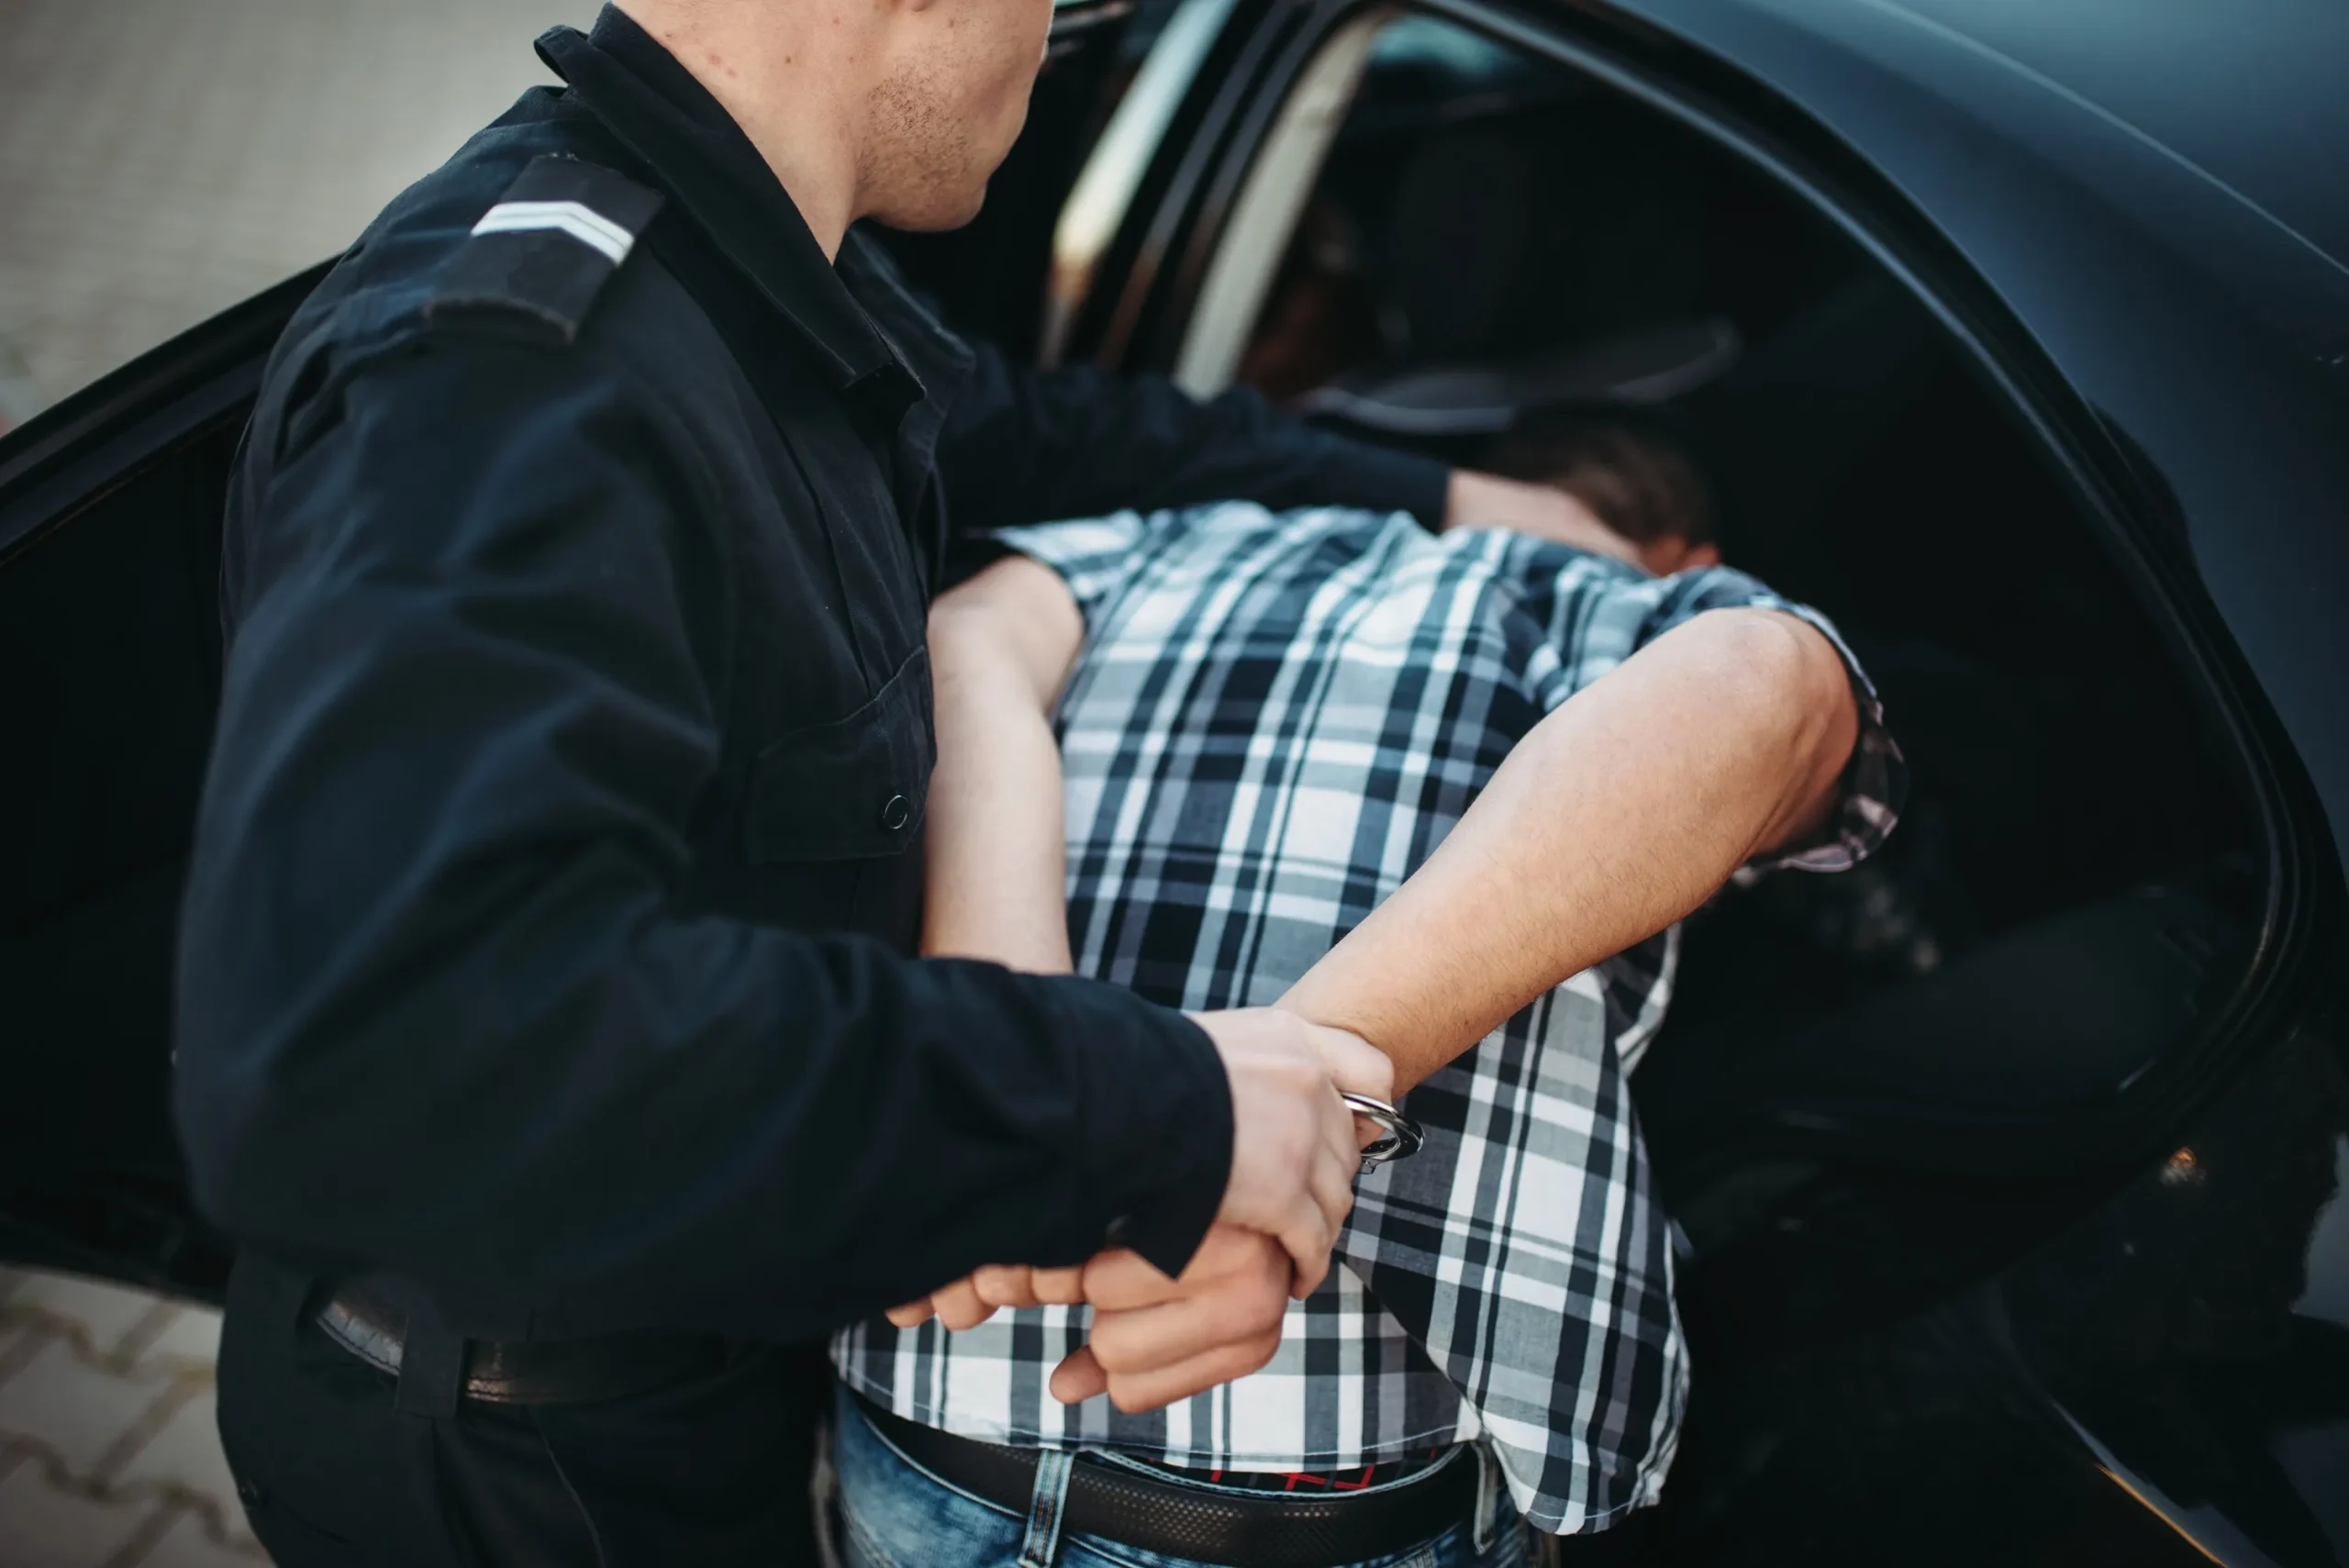 A police officer arresting someone and putting them in the car.